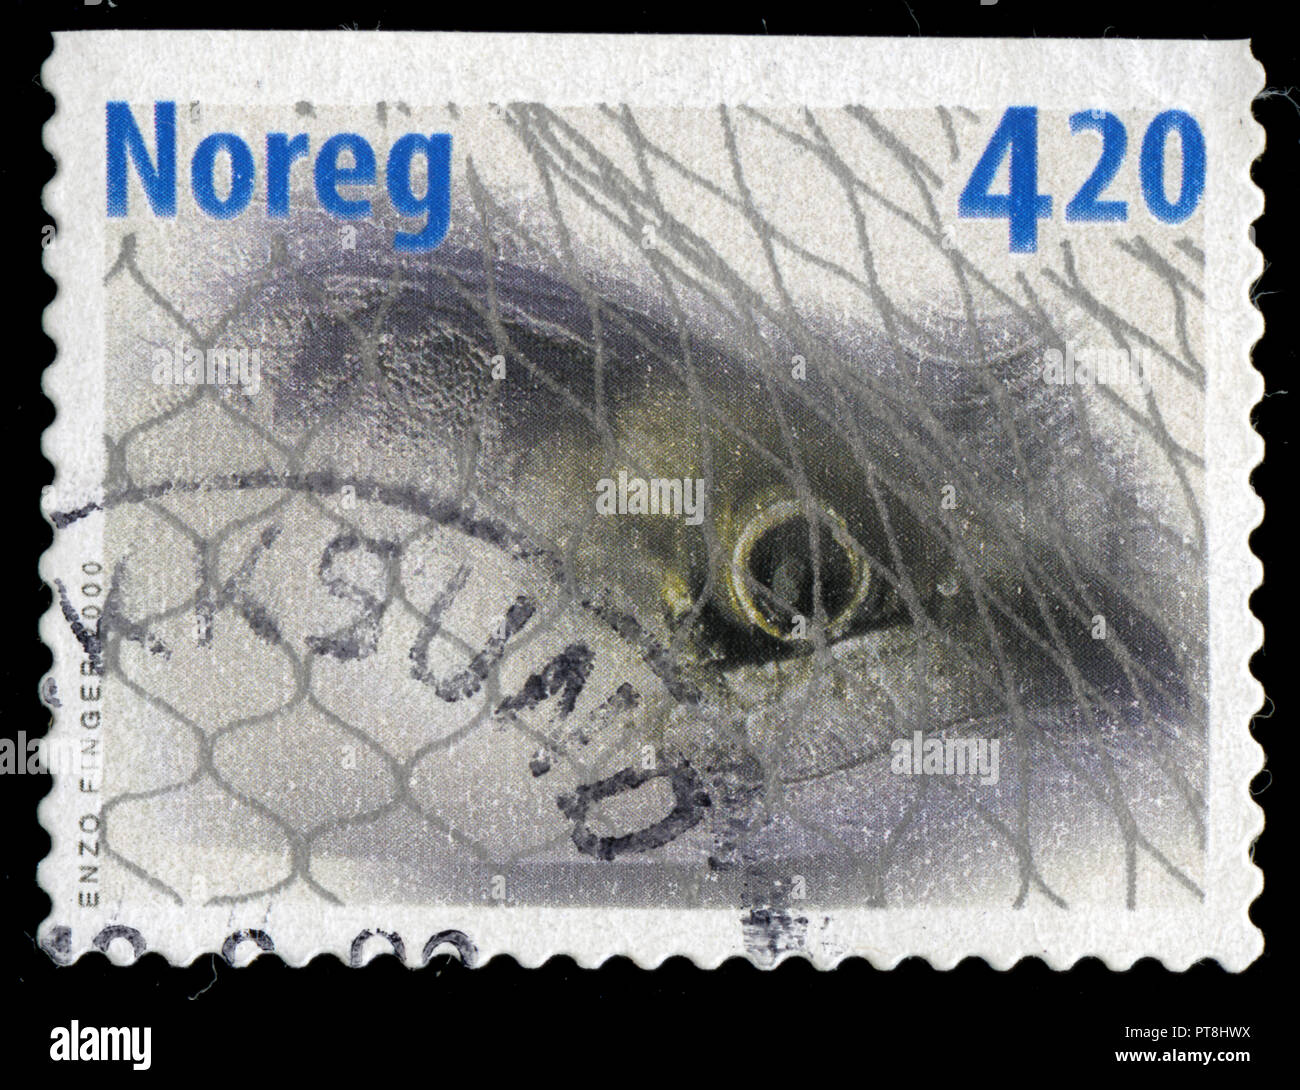 Postmarked stamp from Norway in the Fish series issued in 2000 Stock Photo